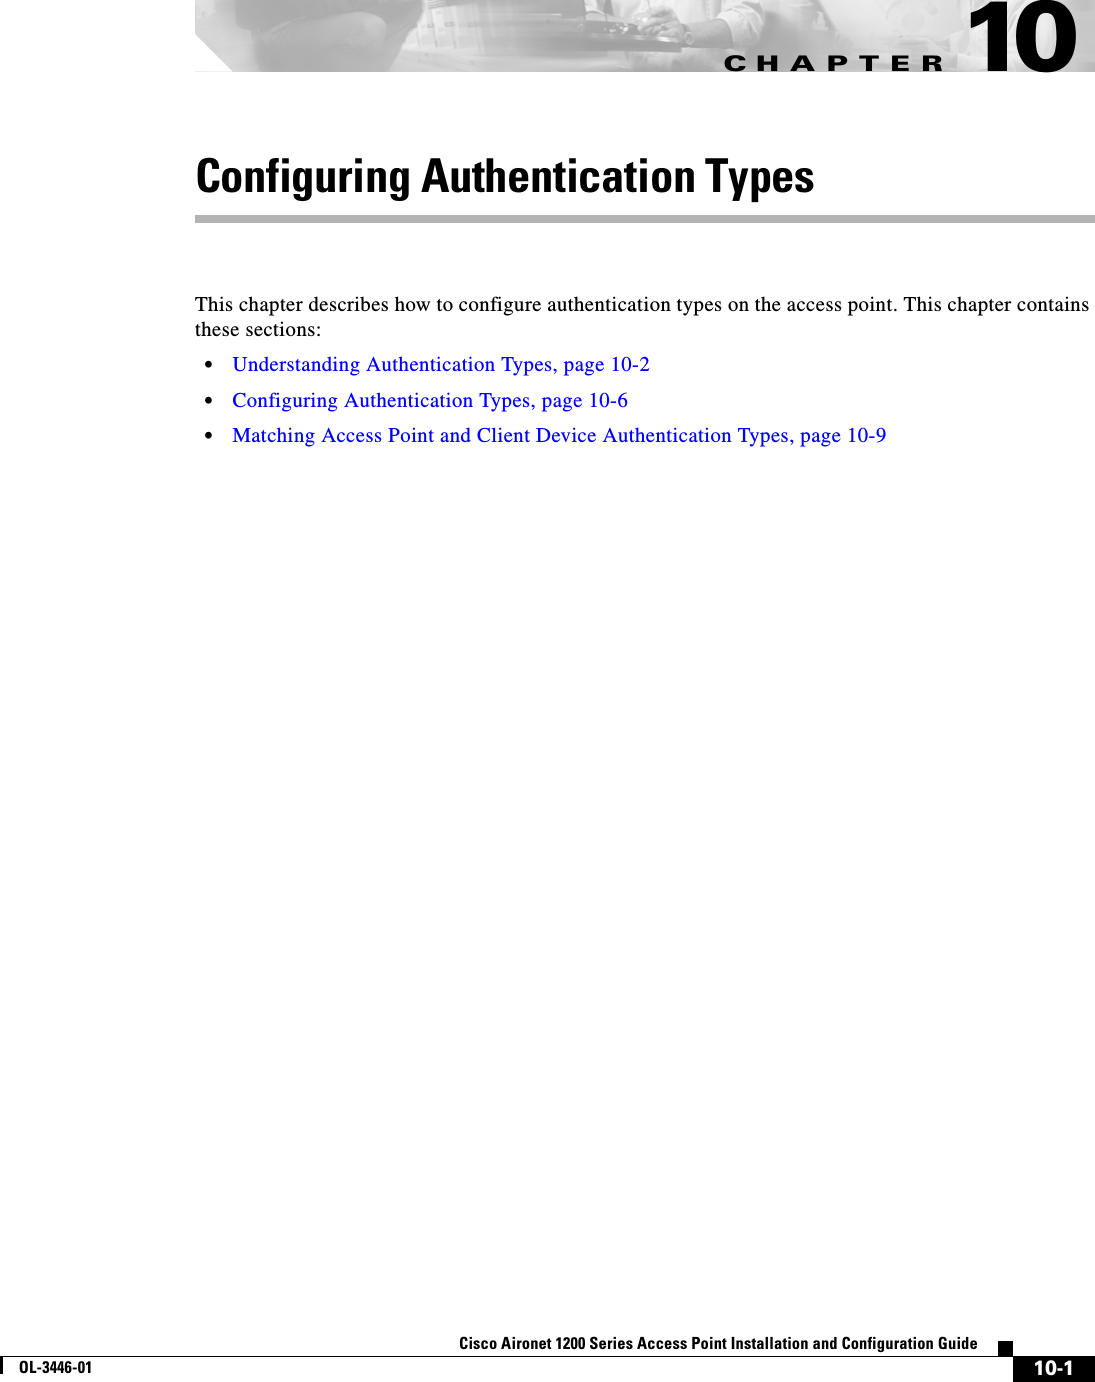 CHAPTER10-1Cisco Aironet 1200 Series Access Point Installation and Configuration GuideOL-3446-0110Configuring Authentication TypesThis chapter describes how to configure authentication types on the access point. This chapter contains these sections:•Understanding Authentication Types, page 10-2•Configuring Authentication Types, page 10-6•Matching Access Point and Client Device Authentication Types, page 10-9